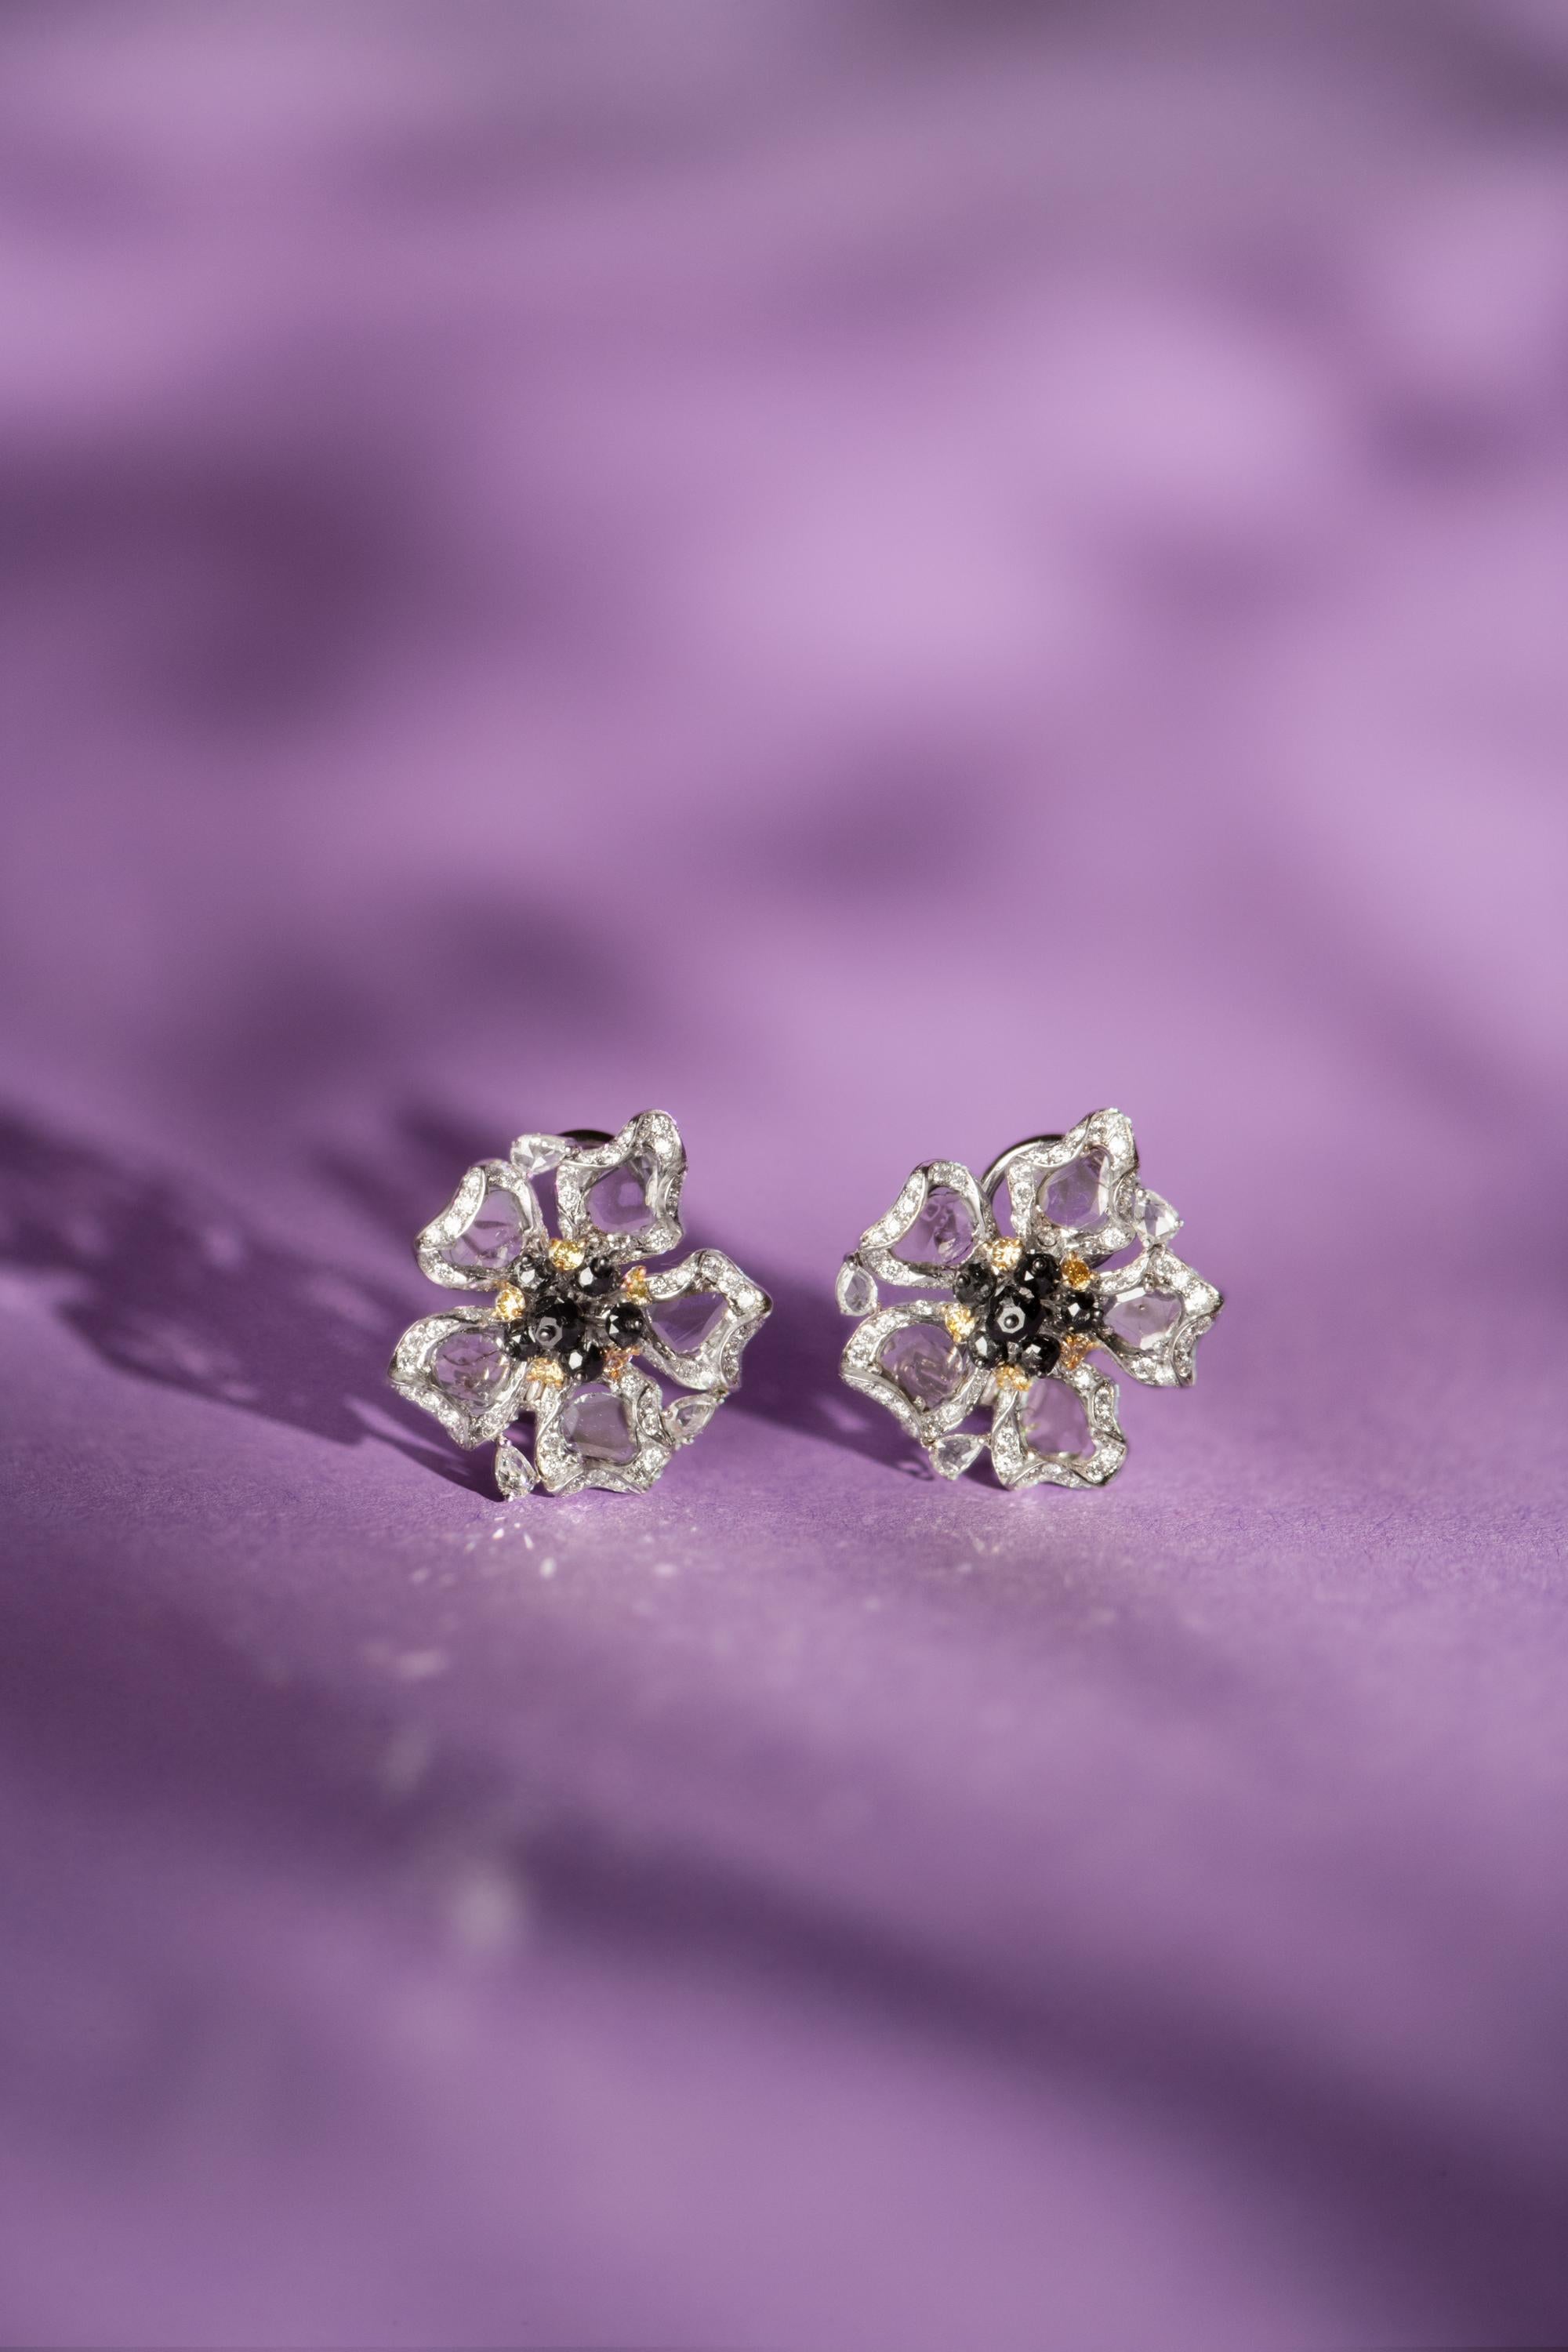 Gross weight: 11.24 grams
Gold weight: 10.50 grams
Total diamond weight: 3.72 carats

A delicate vintage inspired floral design with slice diamond petals surrounding a centre of black diamonds.   Five small yellow diamonds encased in18k yellow gold